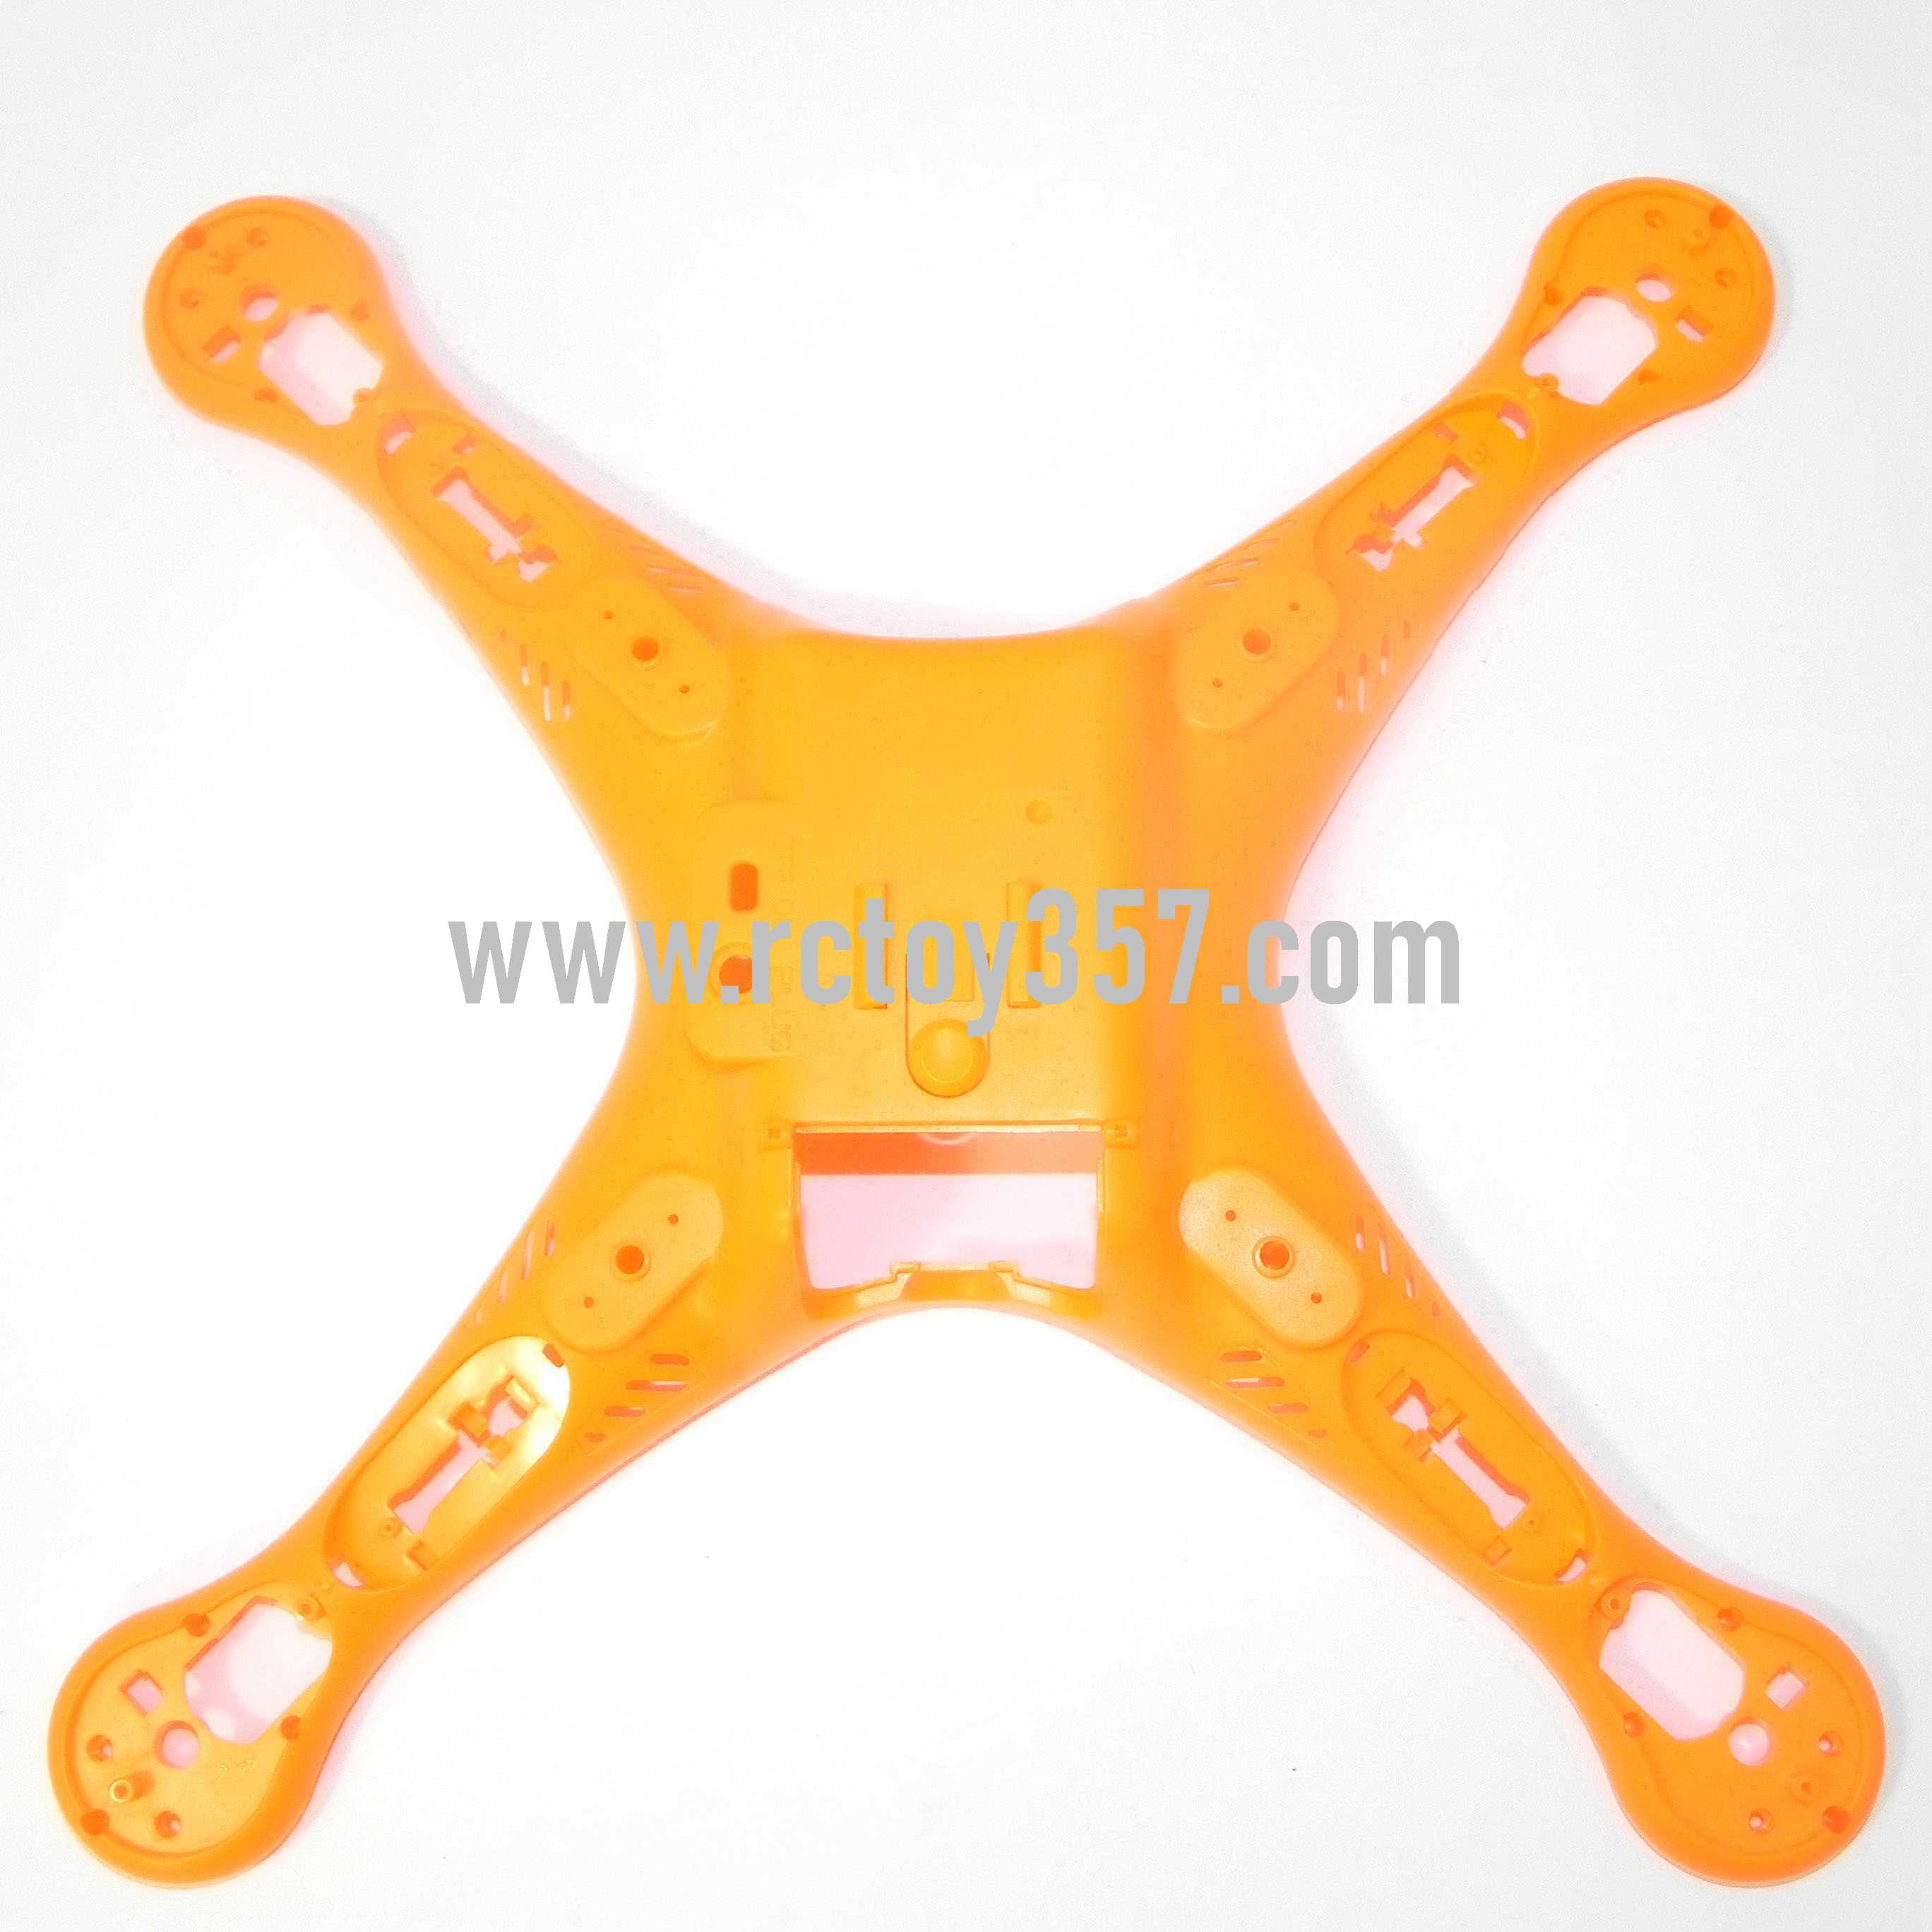 RCToy357.com - SYMA X8W Quadcopter toy Parts Lower board(yellow)